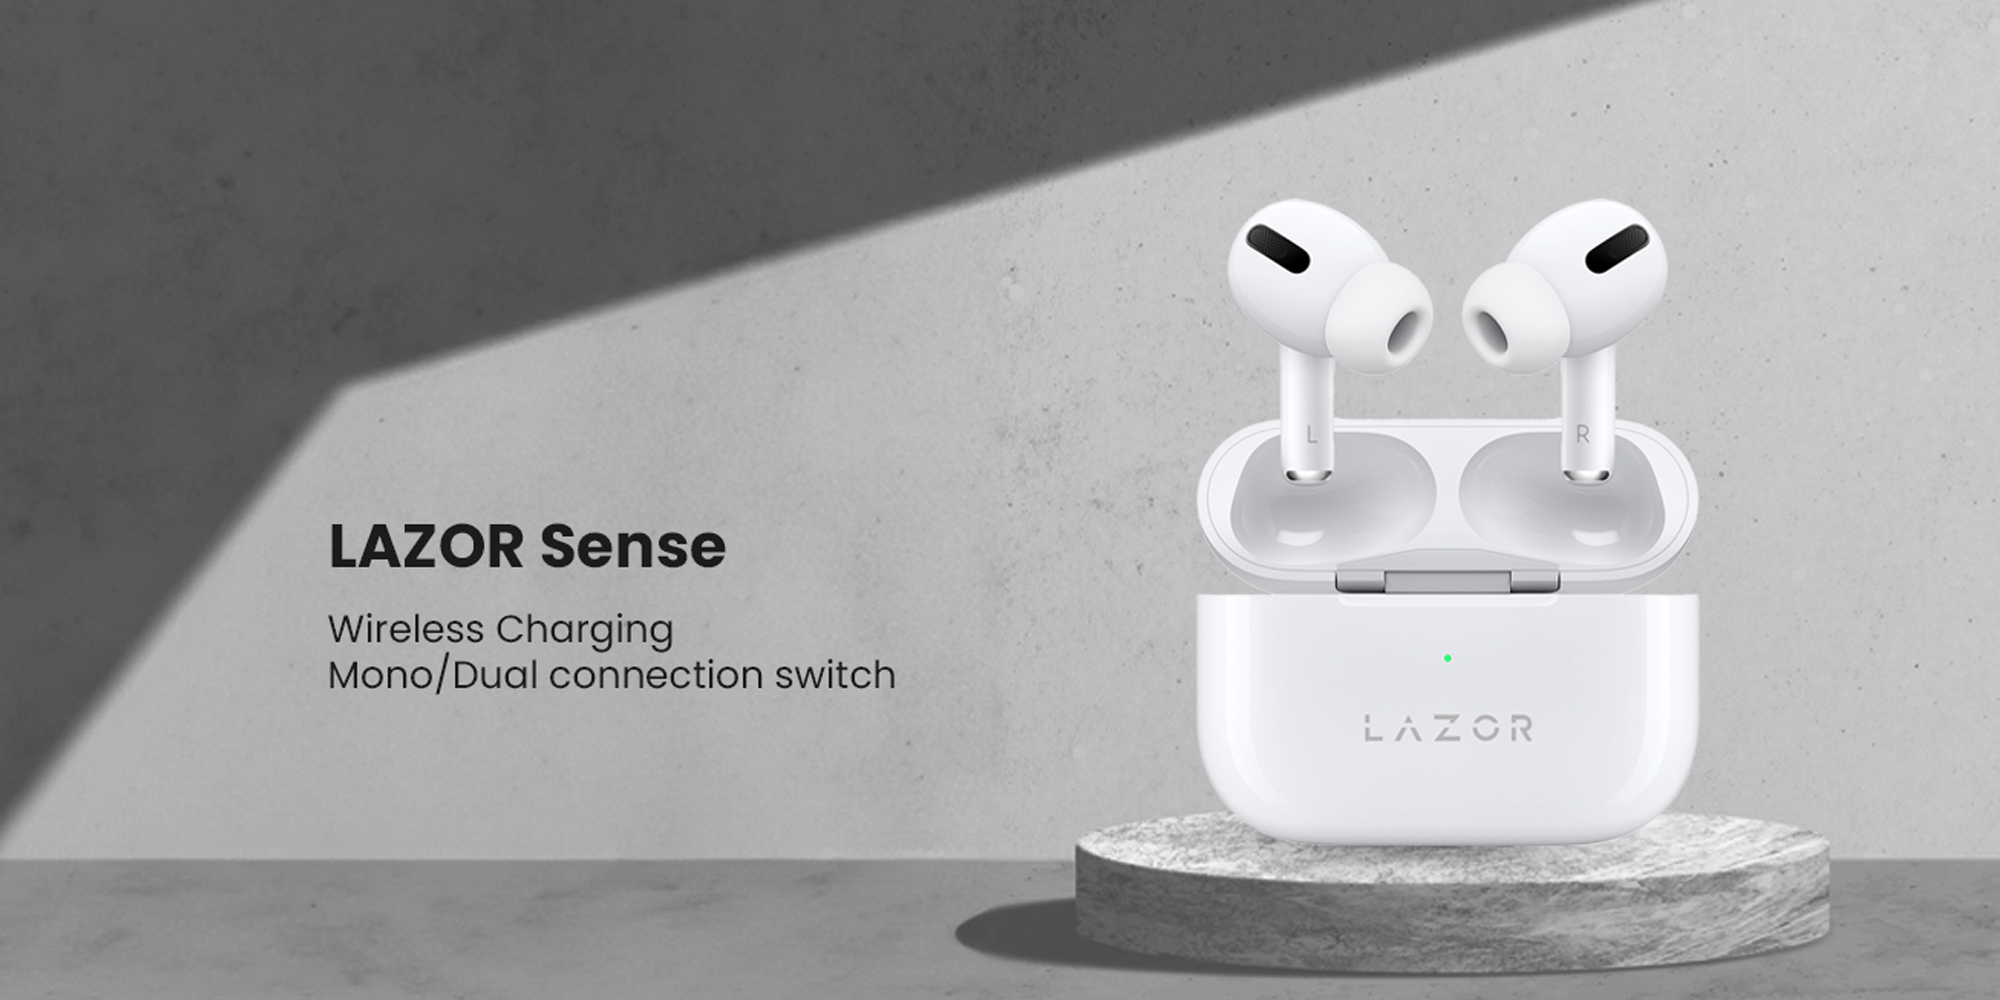 Lazor Sense EA79 TWS In-Ear Earphones: Mono/Dual Connection Switch, Touch Control, BT V5.0, Bass Boost+, Wireless &amp; Lightning Charging - White